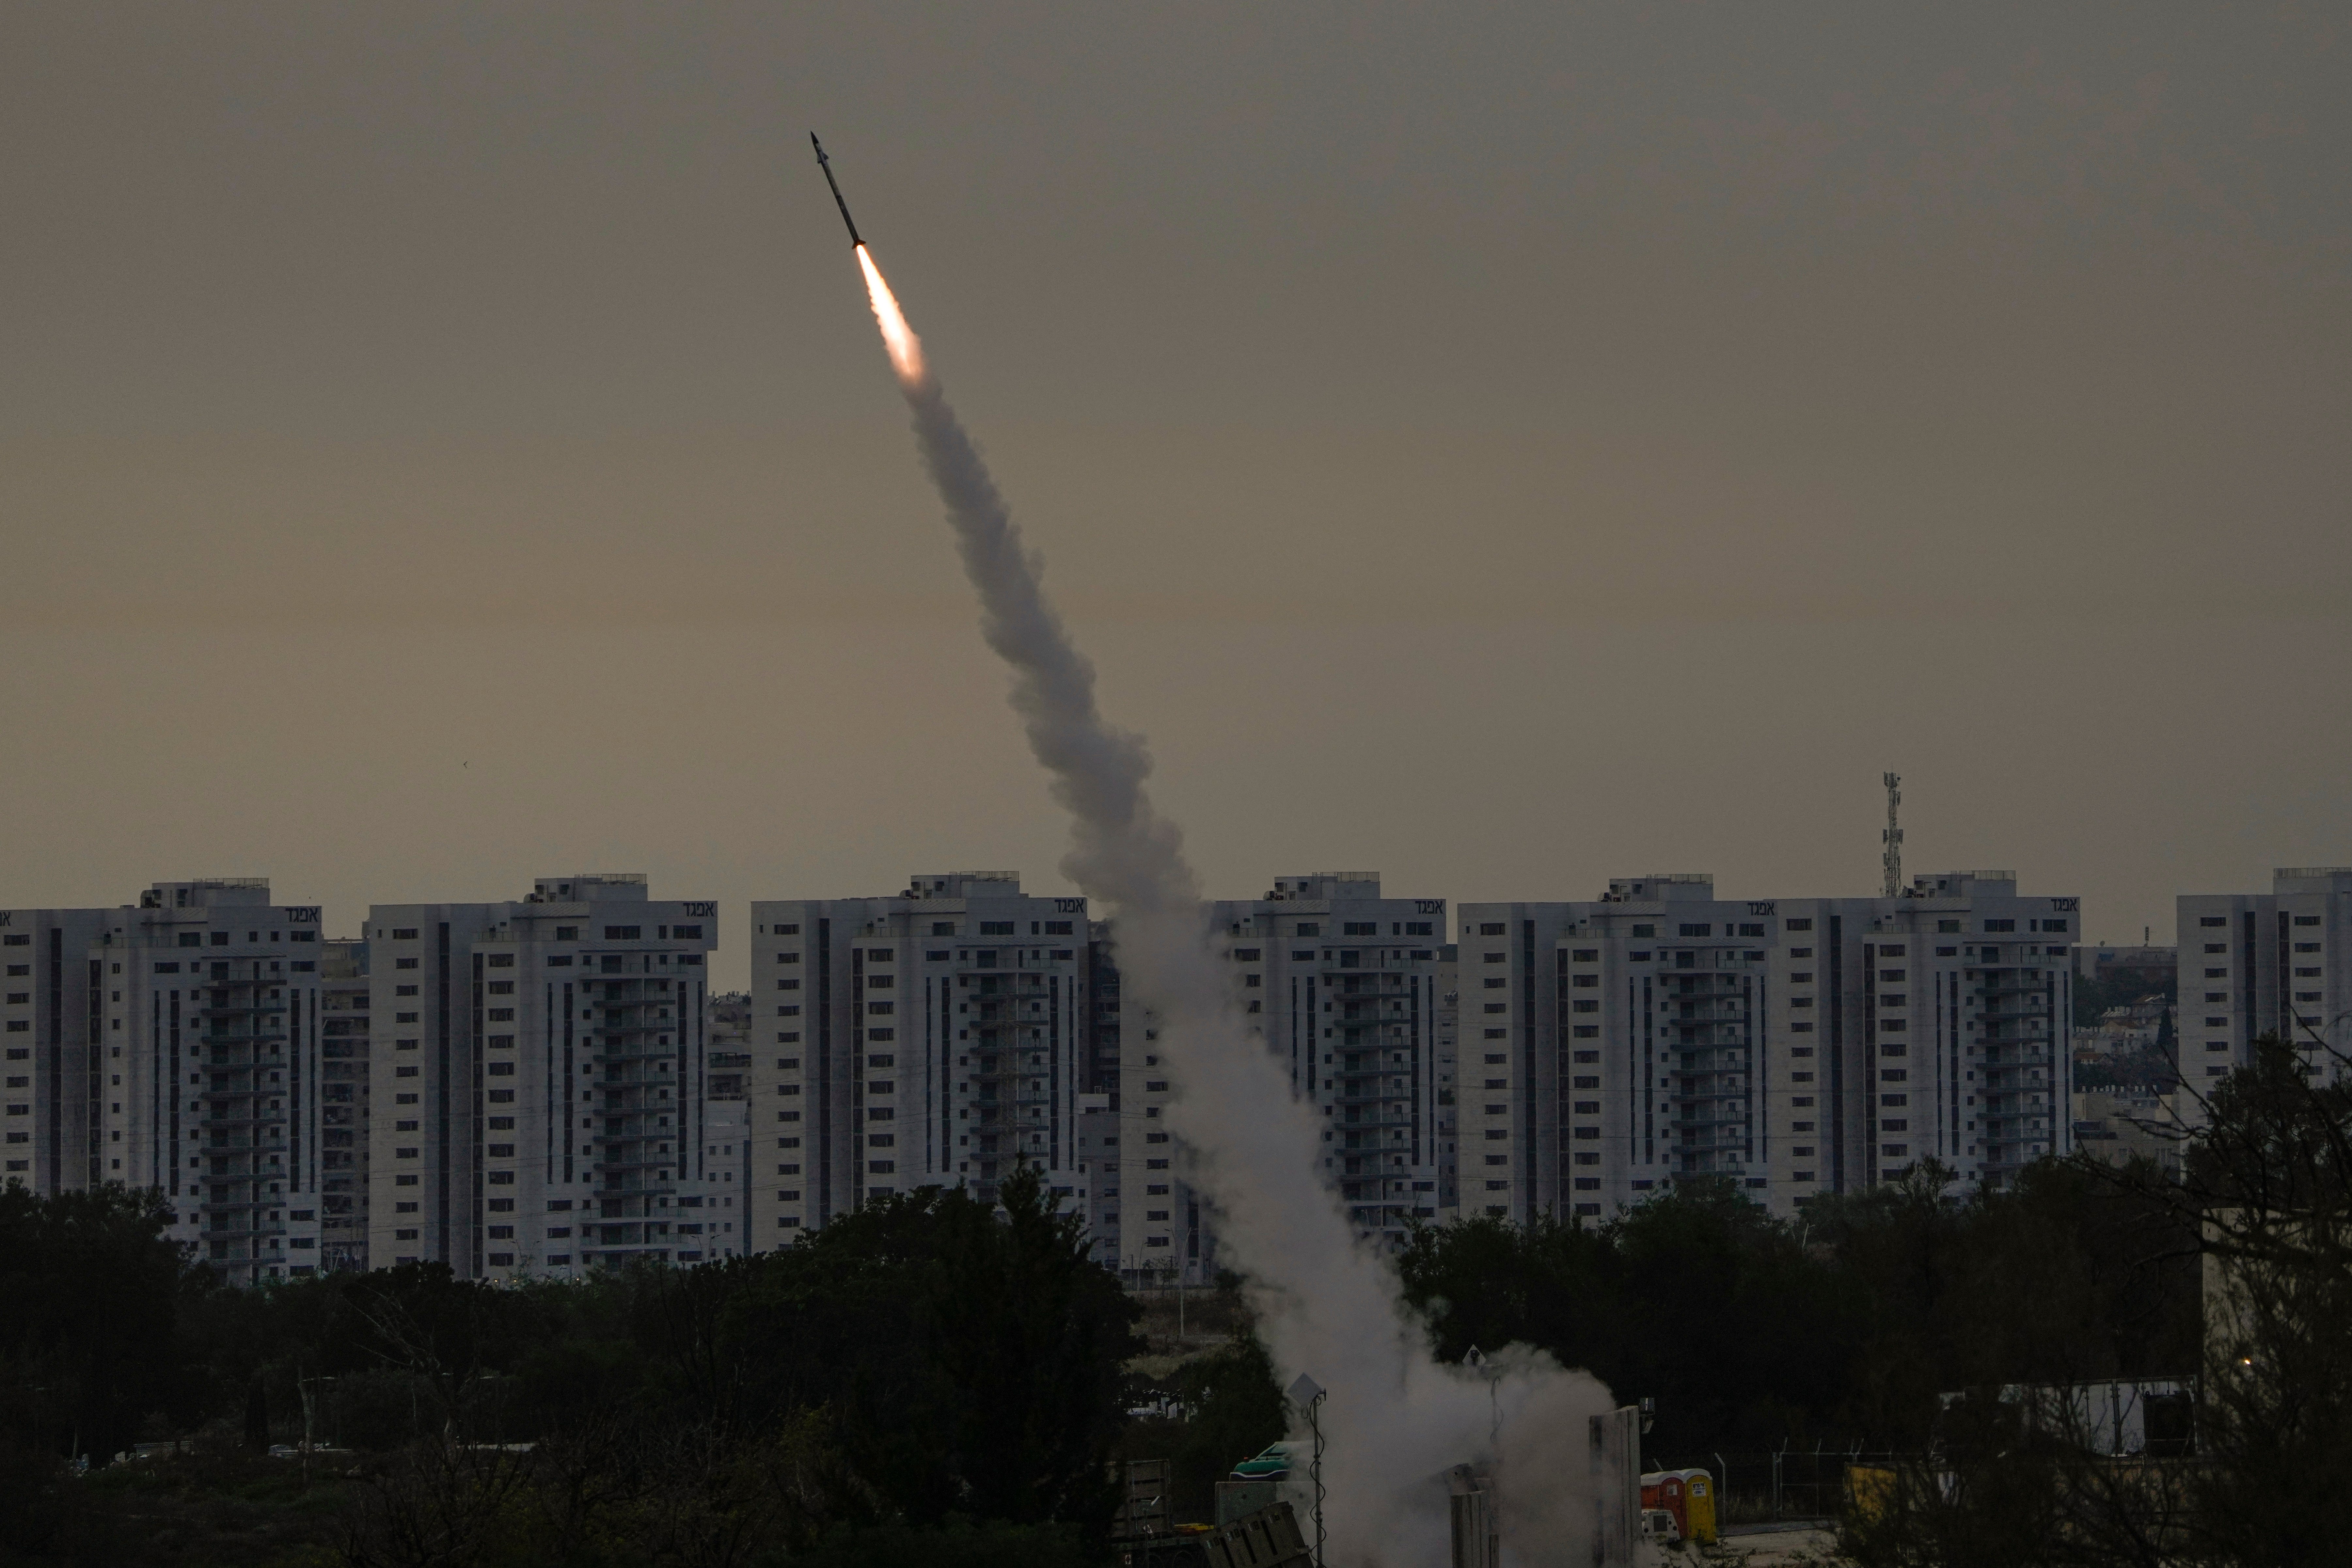 Israel’s Iron Dome anti-missile system – which repelled Tehran’s onslaught on Saturday – intercepts a rocket